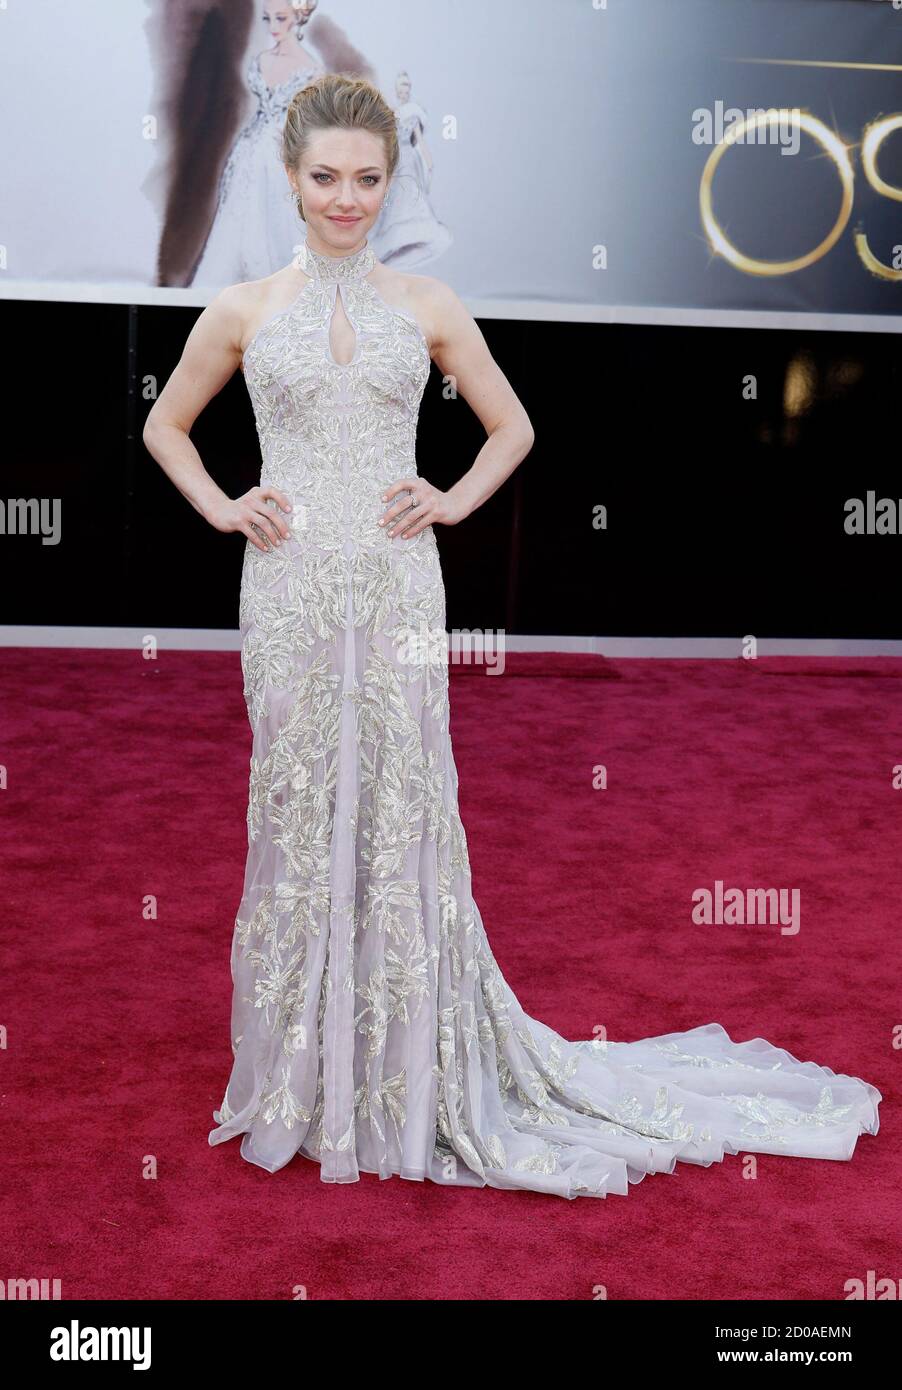 Actress Amanda Seyfried, from "Les Miserables," wearing an Alexander  McQueen dress, arrives at the 85th Academy Awards in Hollywood, California,  February 24, 2013. REUTERS/Lucas Jackson (UNITED STATES - Tags:  ENTERTAINMENT) (OSCARS-ARRIVALS Stock